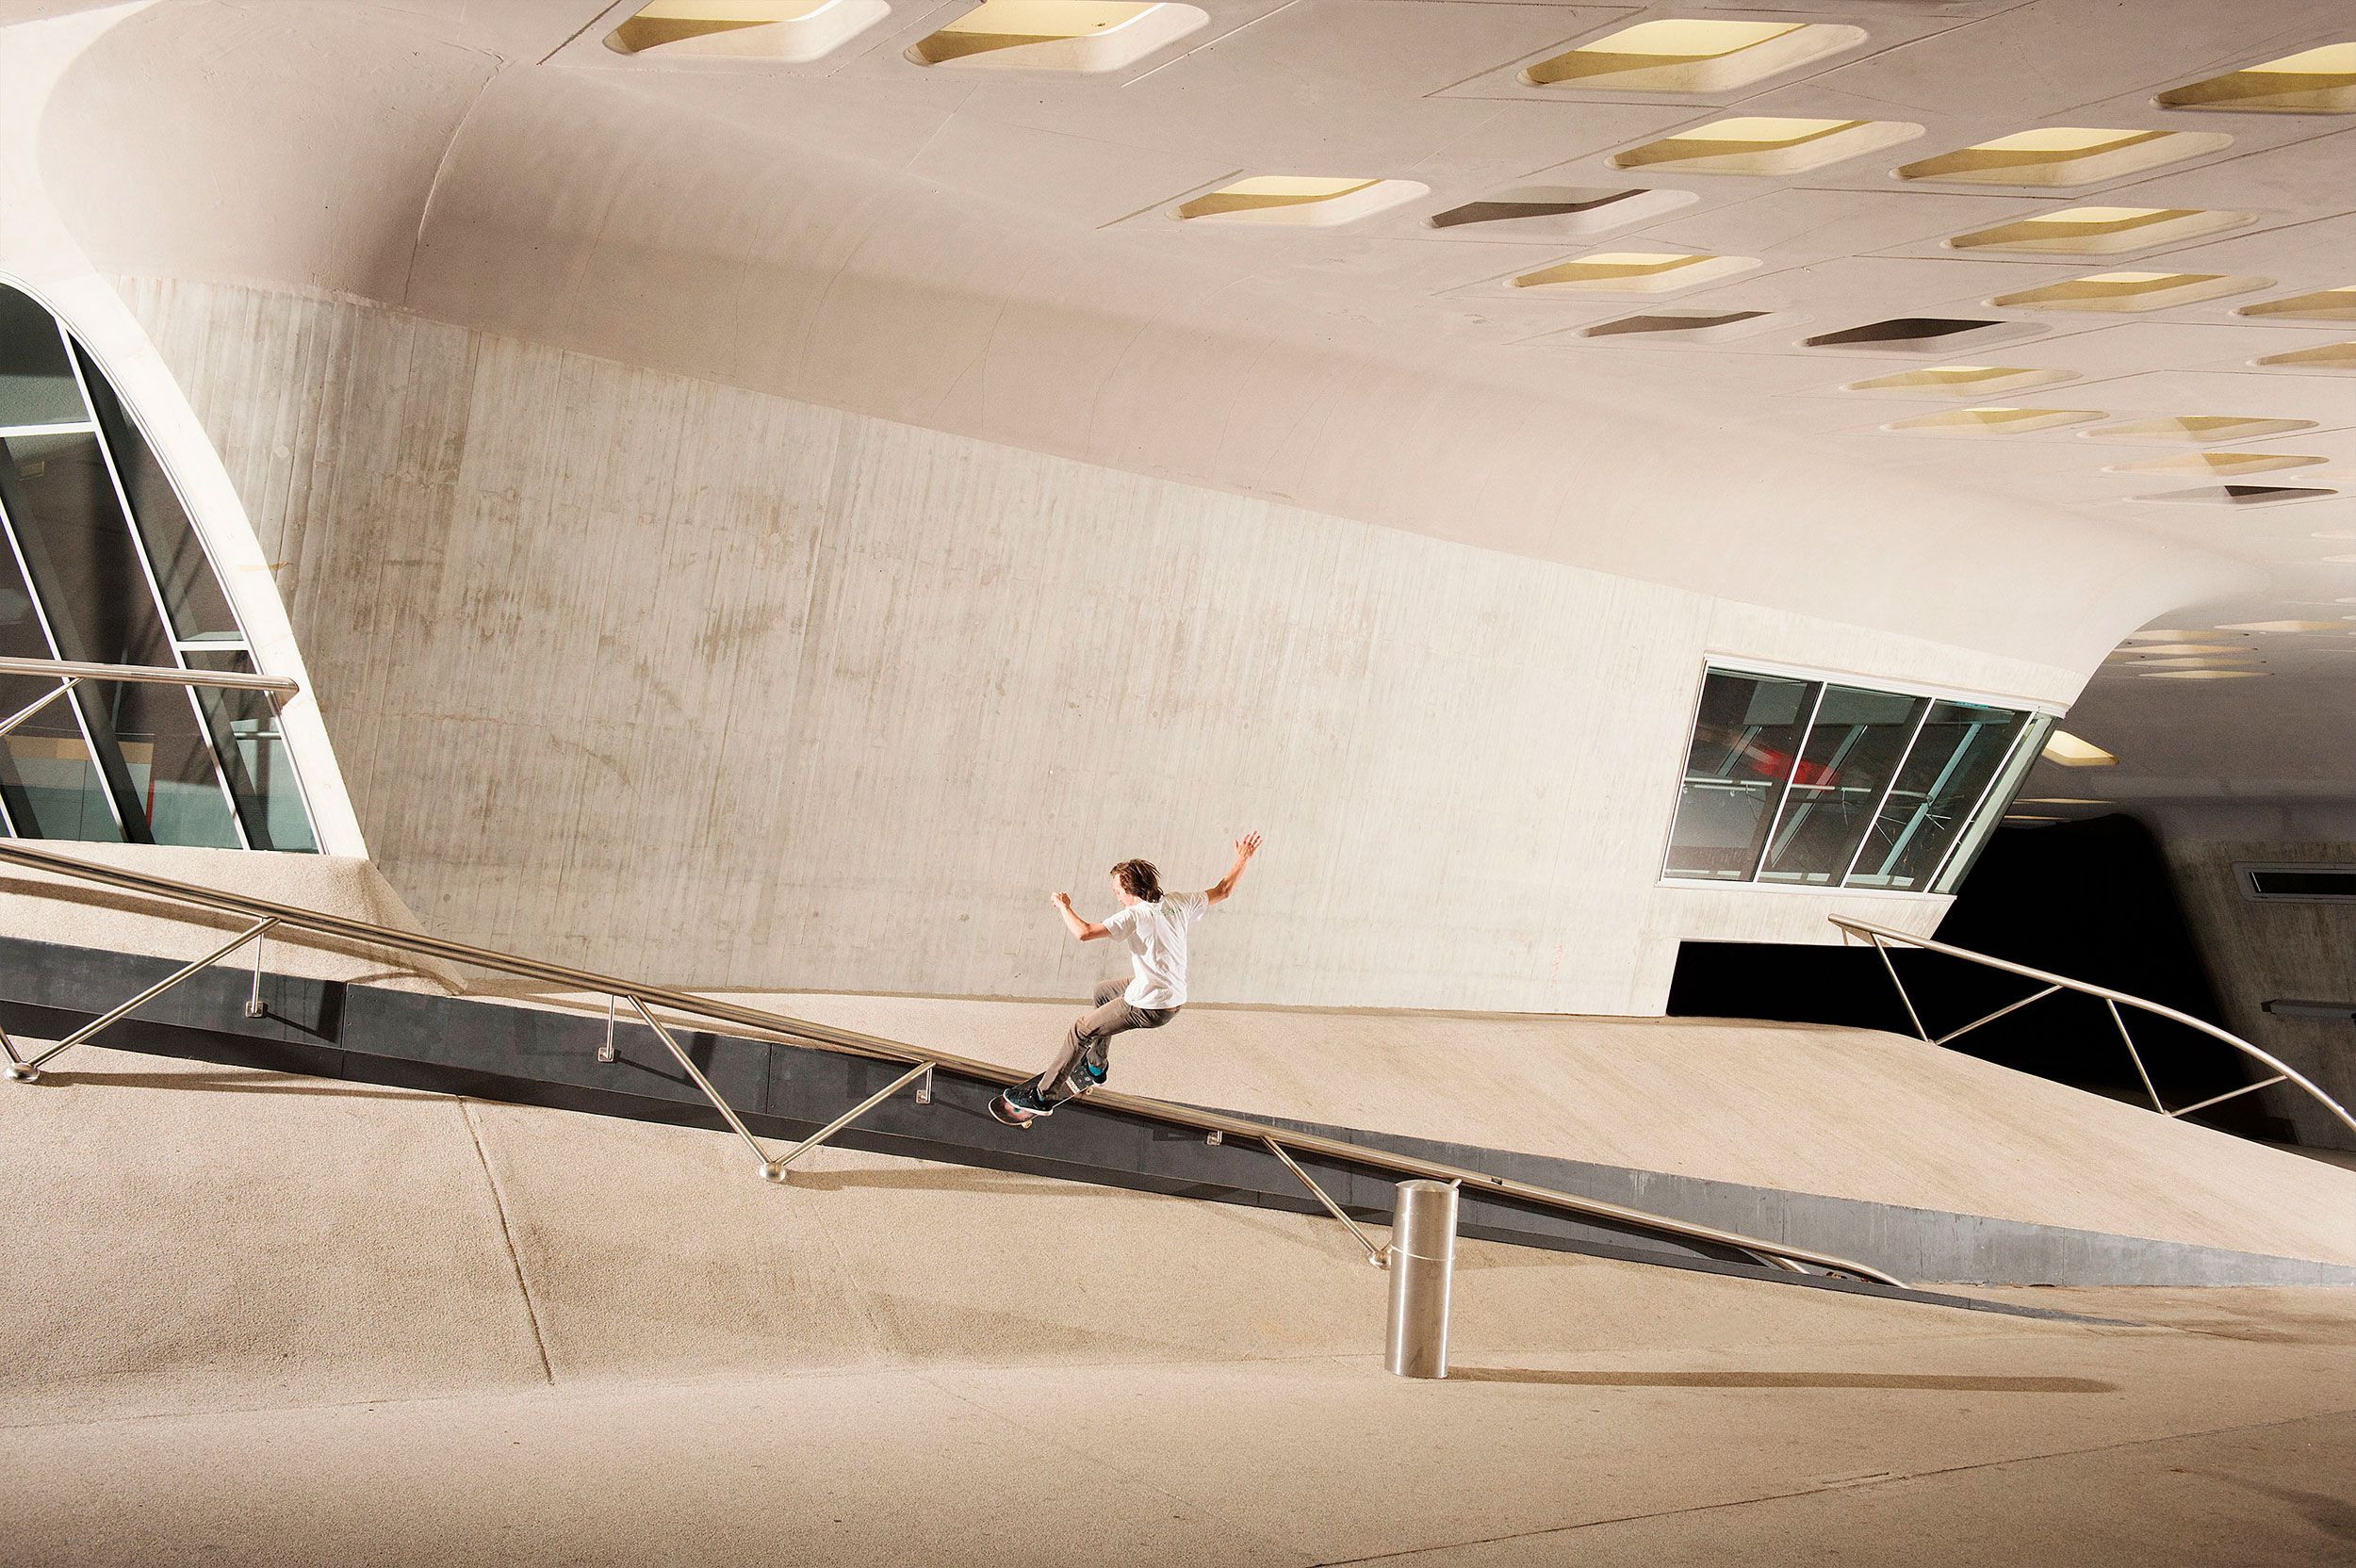 Andre Gerlich, fs Smithgrind, Phaeno WOB, Willi Nothers